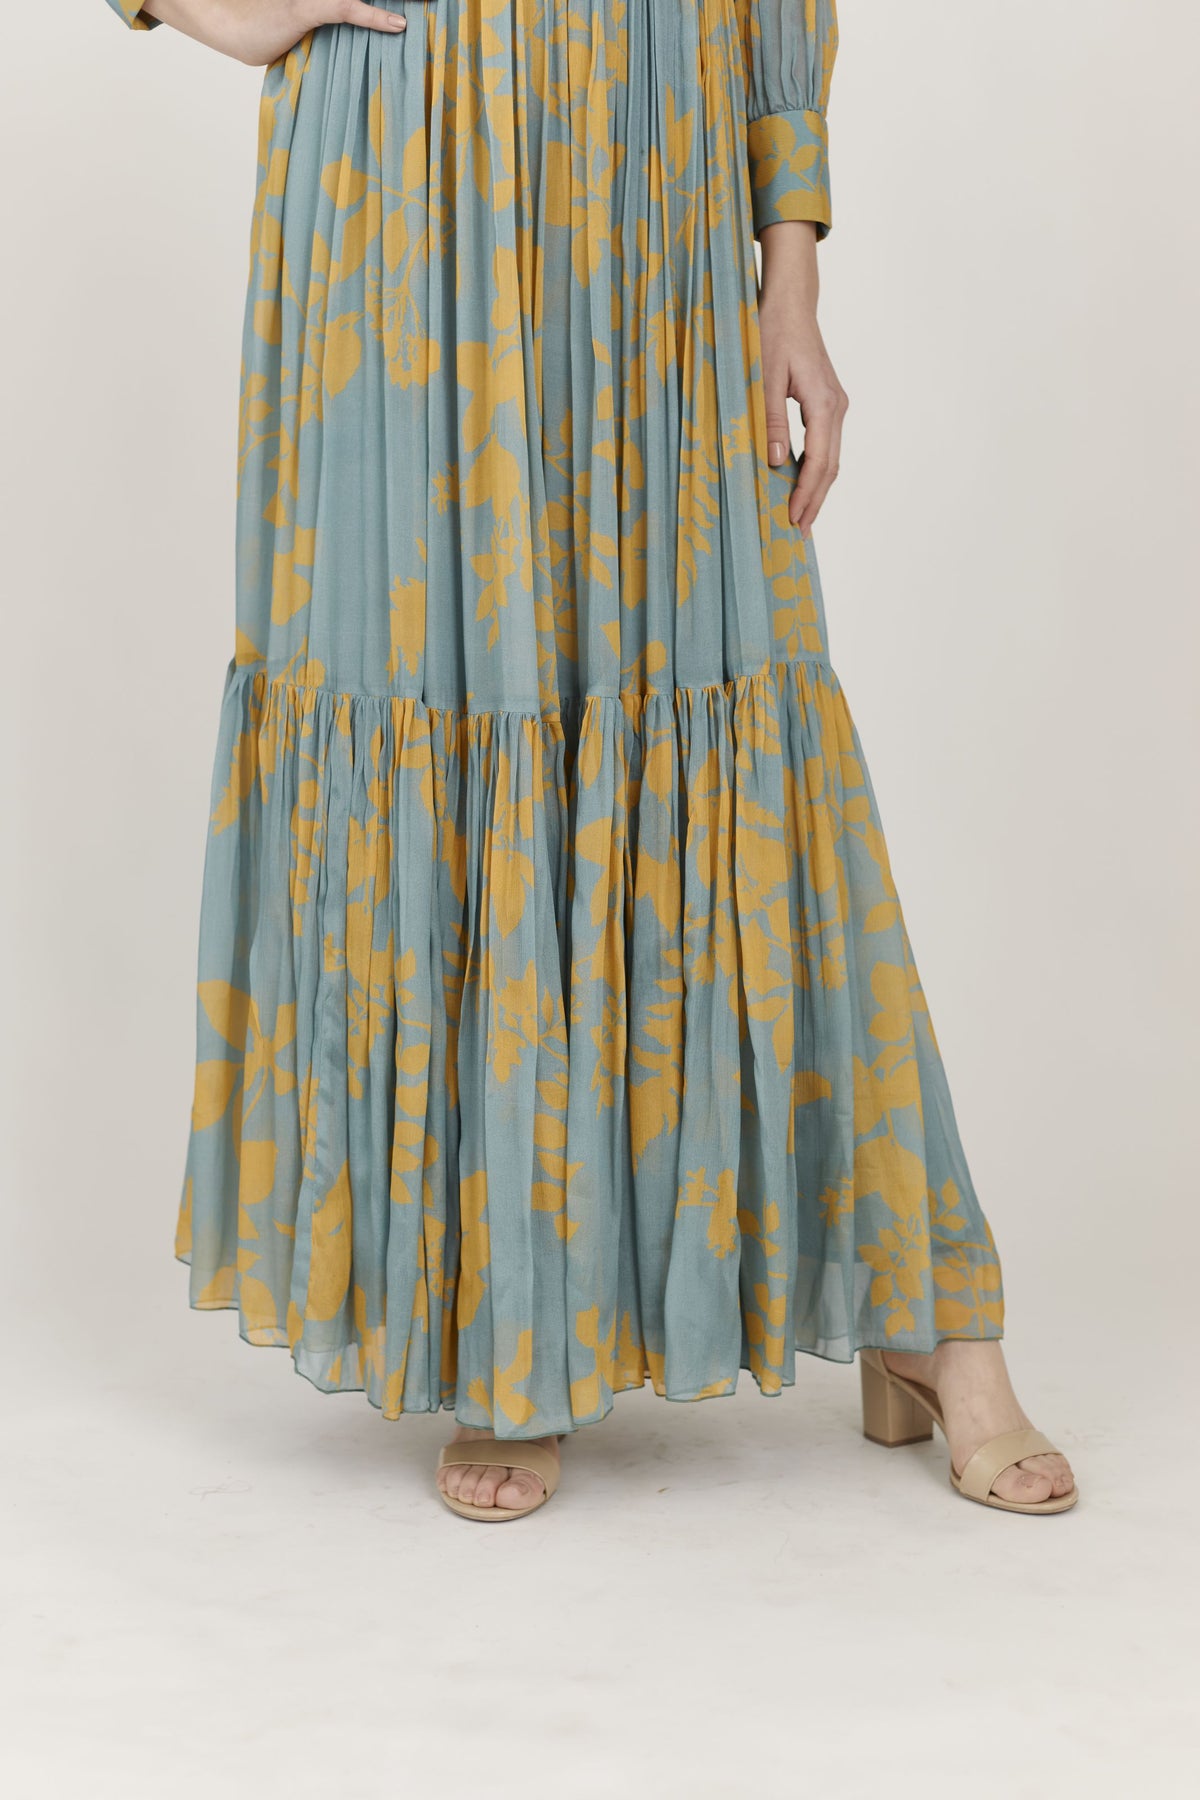 BLUE AND MUSTARD FLORAL LONG FRILL DRESS